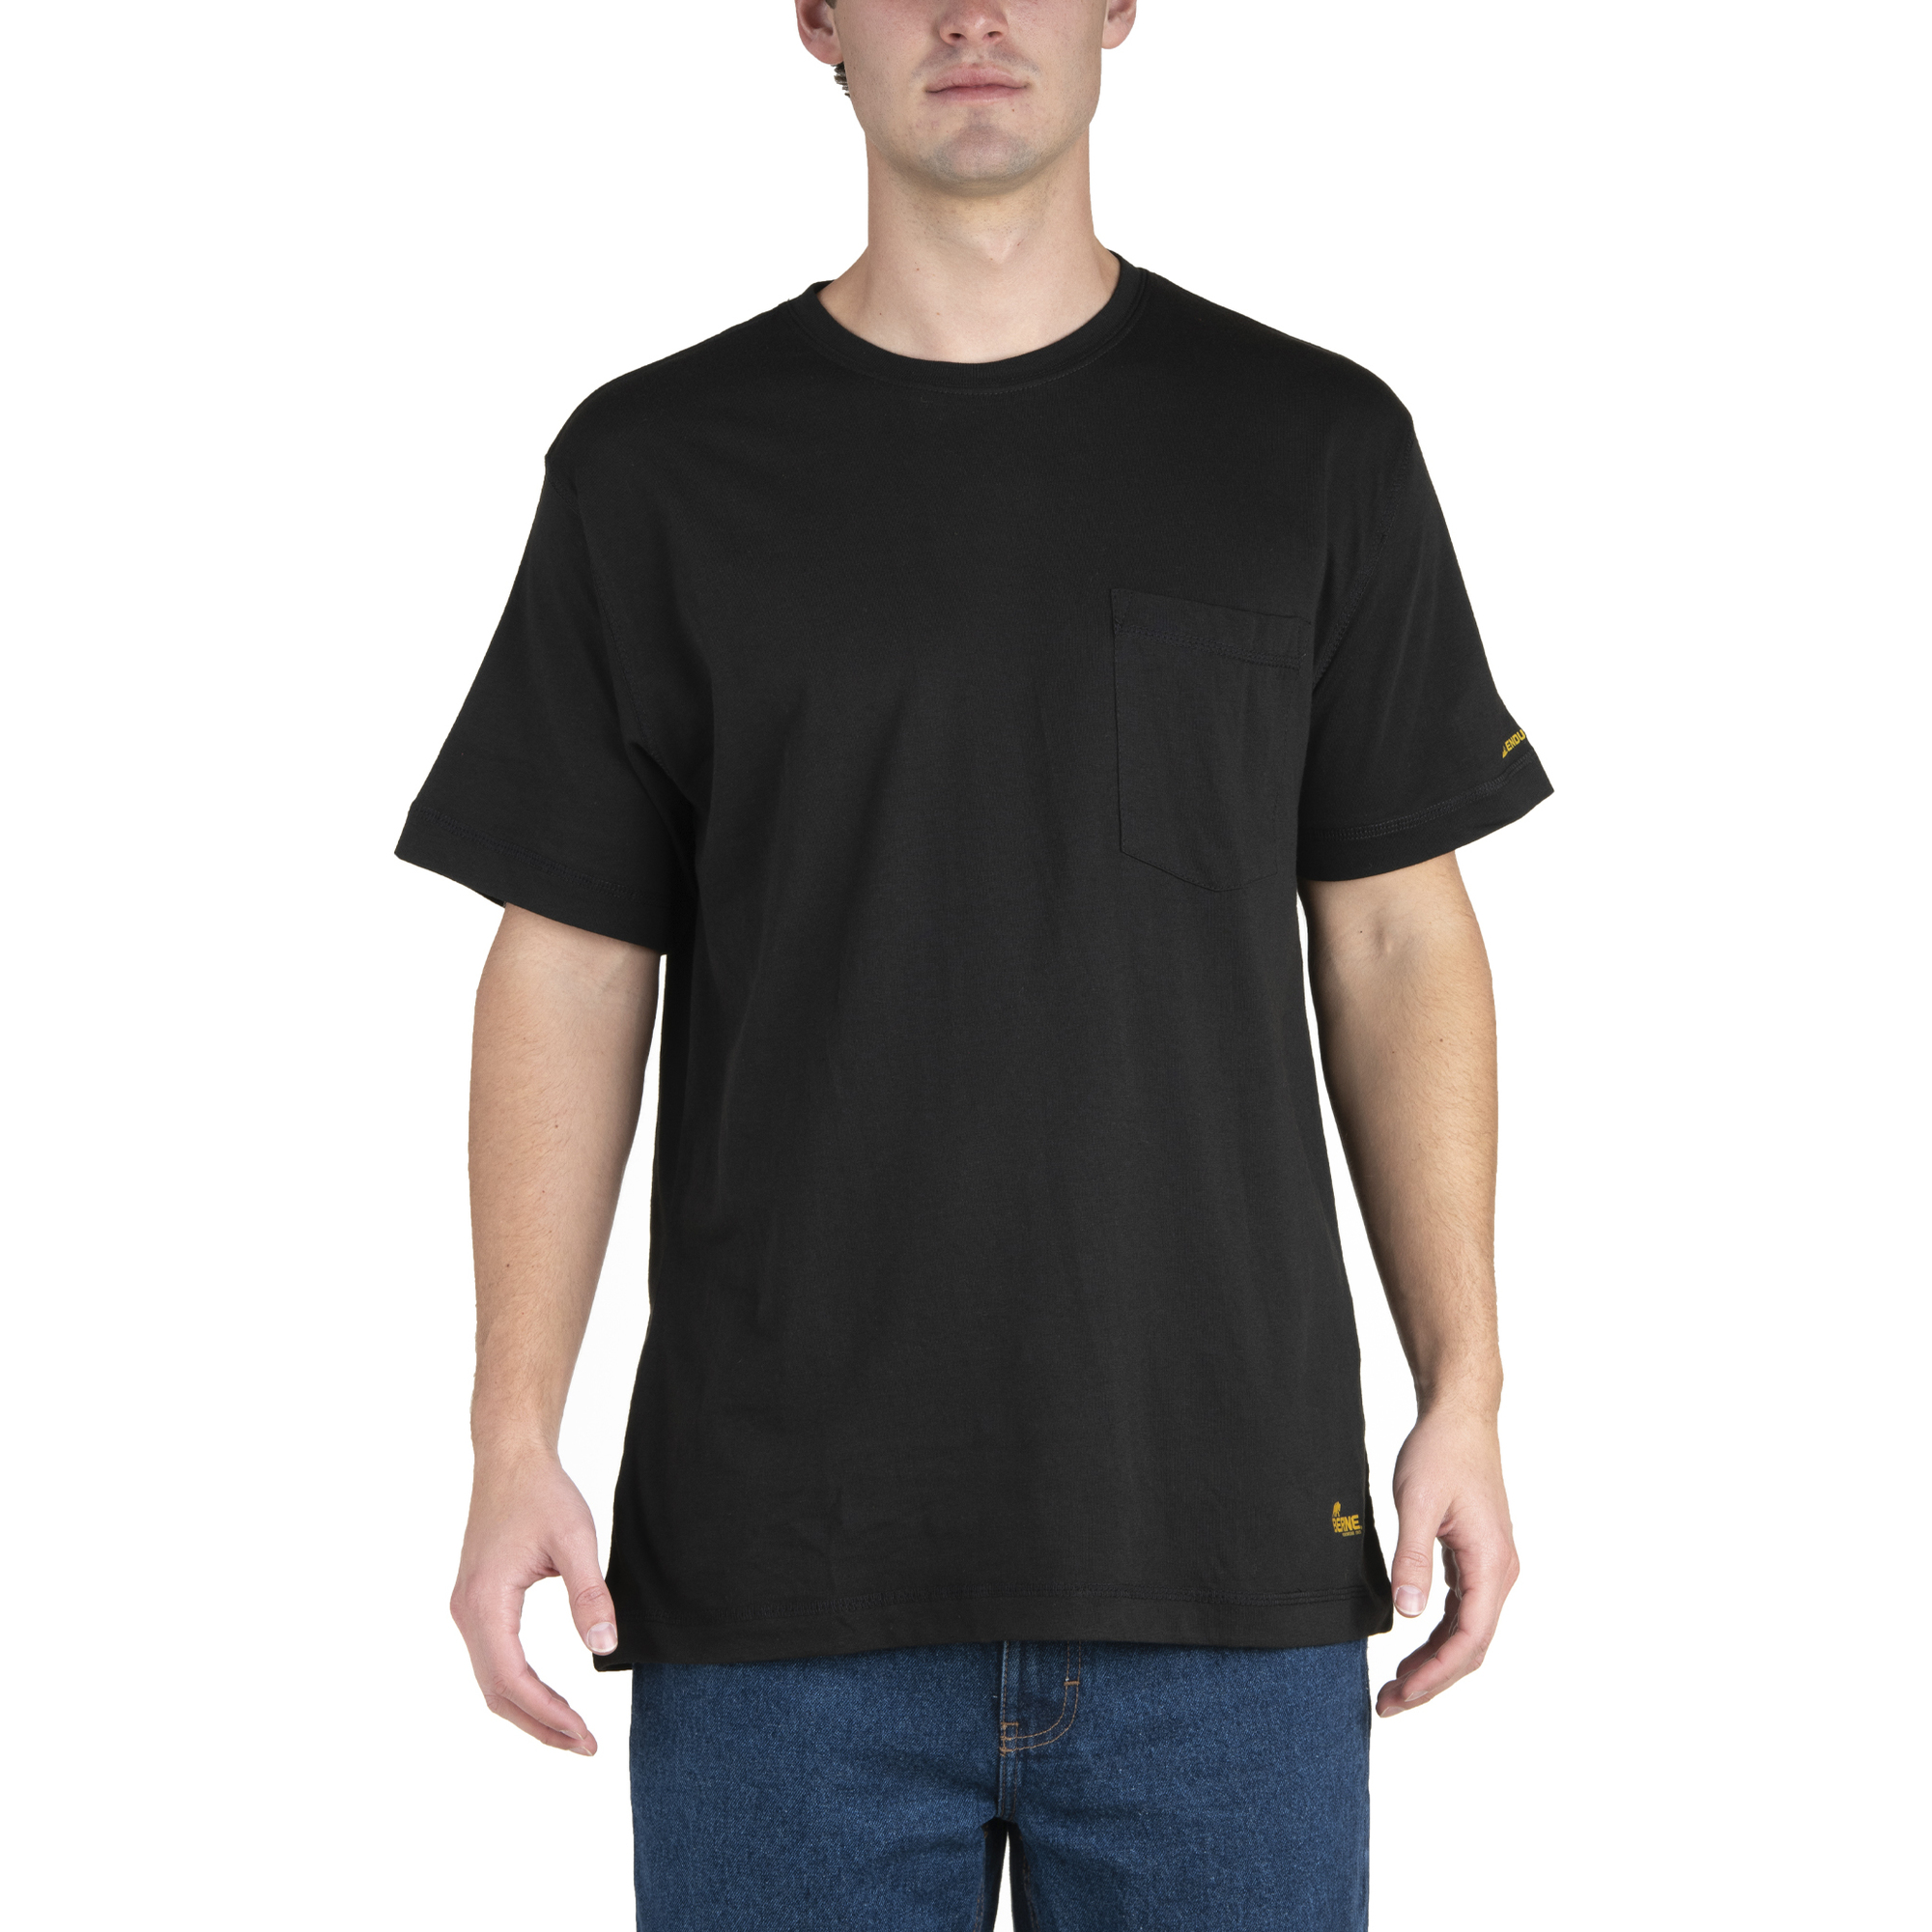 Berne Apparel, Lightweight Performance Tee-Style, Size 3XLT, Color Black, Material 60% Cotton 40% Polyester, Model BSM38